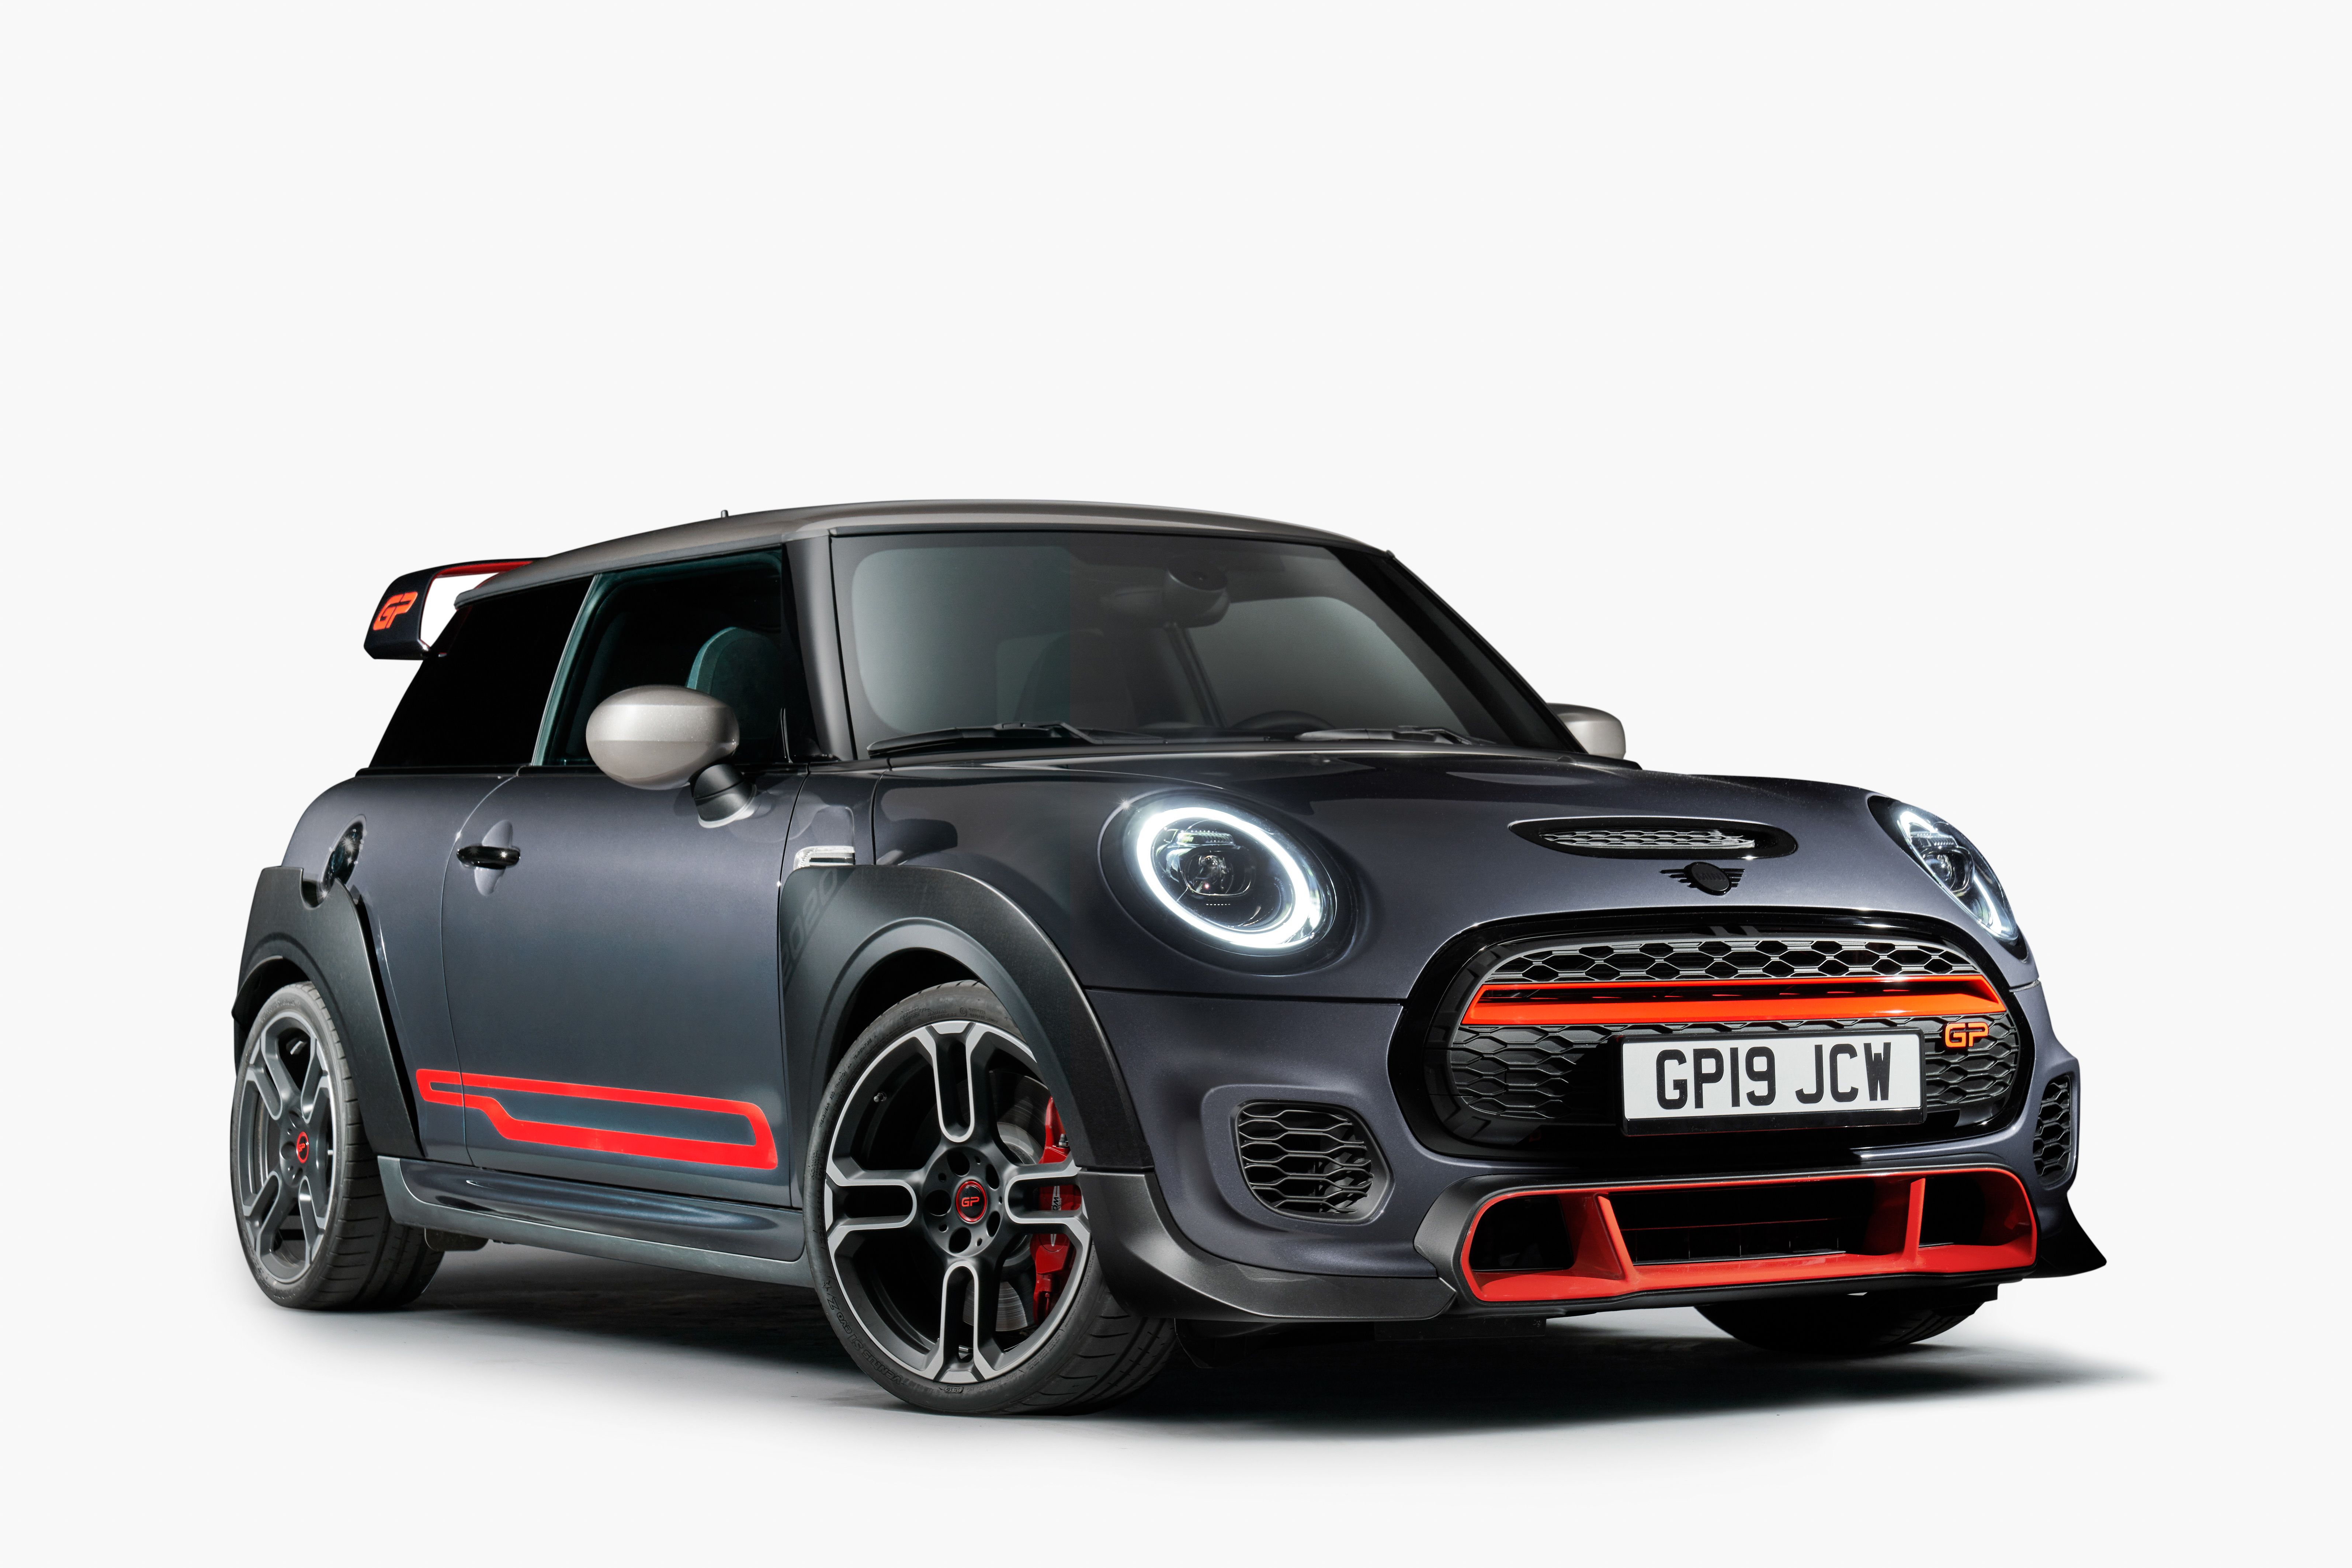 302HP Mini John Cooper Works GP Is Powerful and ProductionReady with 74 hp more than the